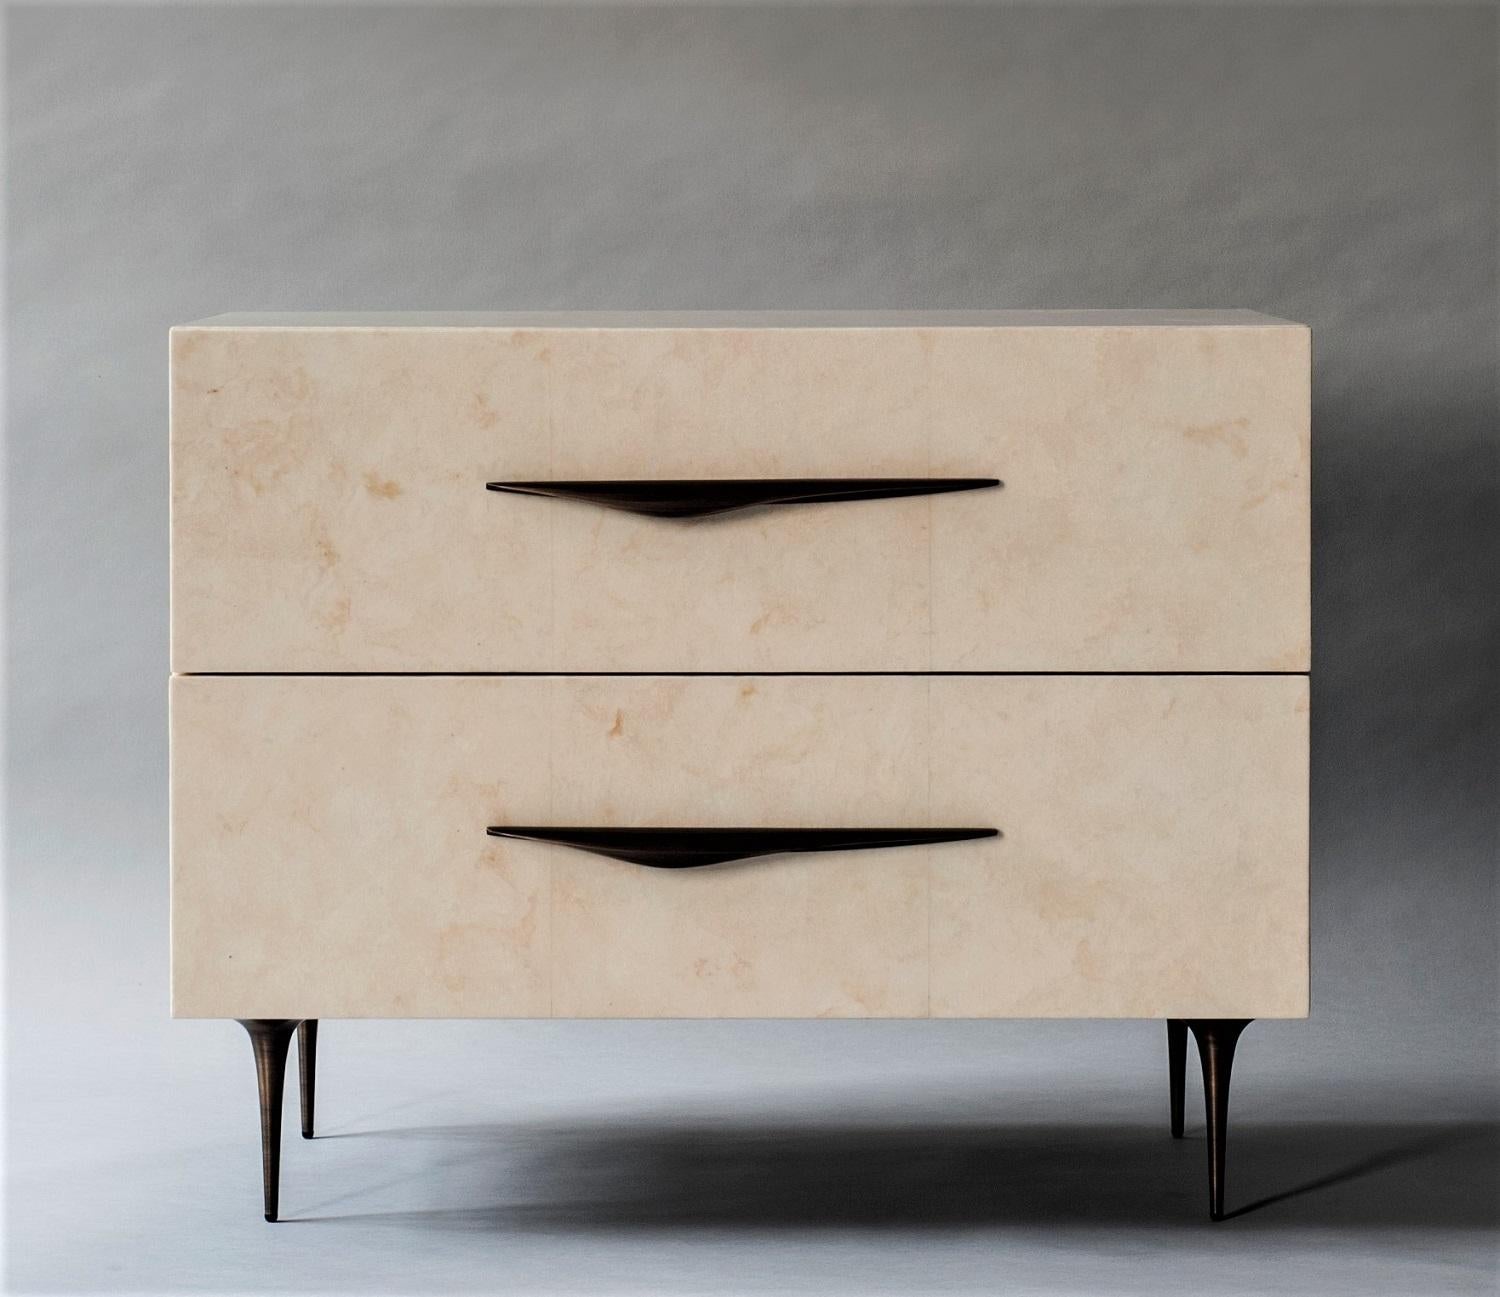 The sculptural legs and handles of the Antwerp bedside tables contrast the soft color shifts in the Carta sheathing the table's body. Made with right hand and left hand facing handles.